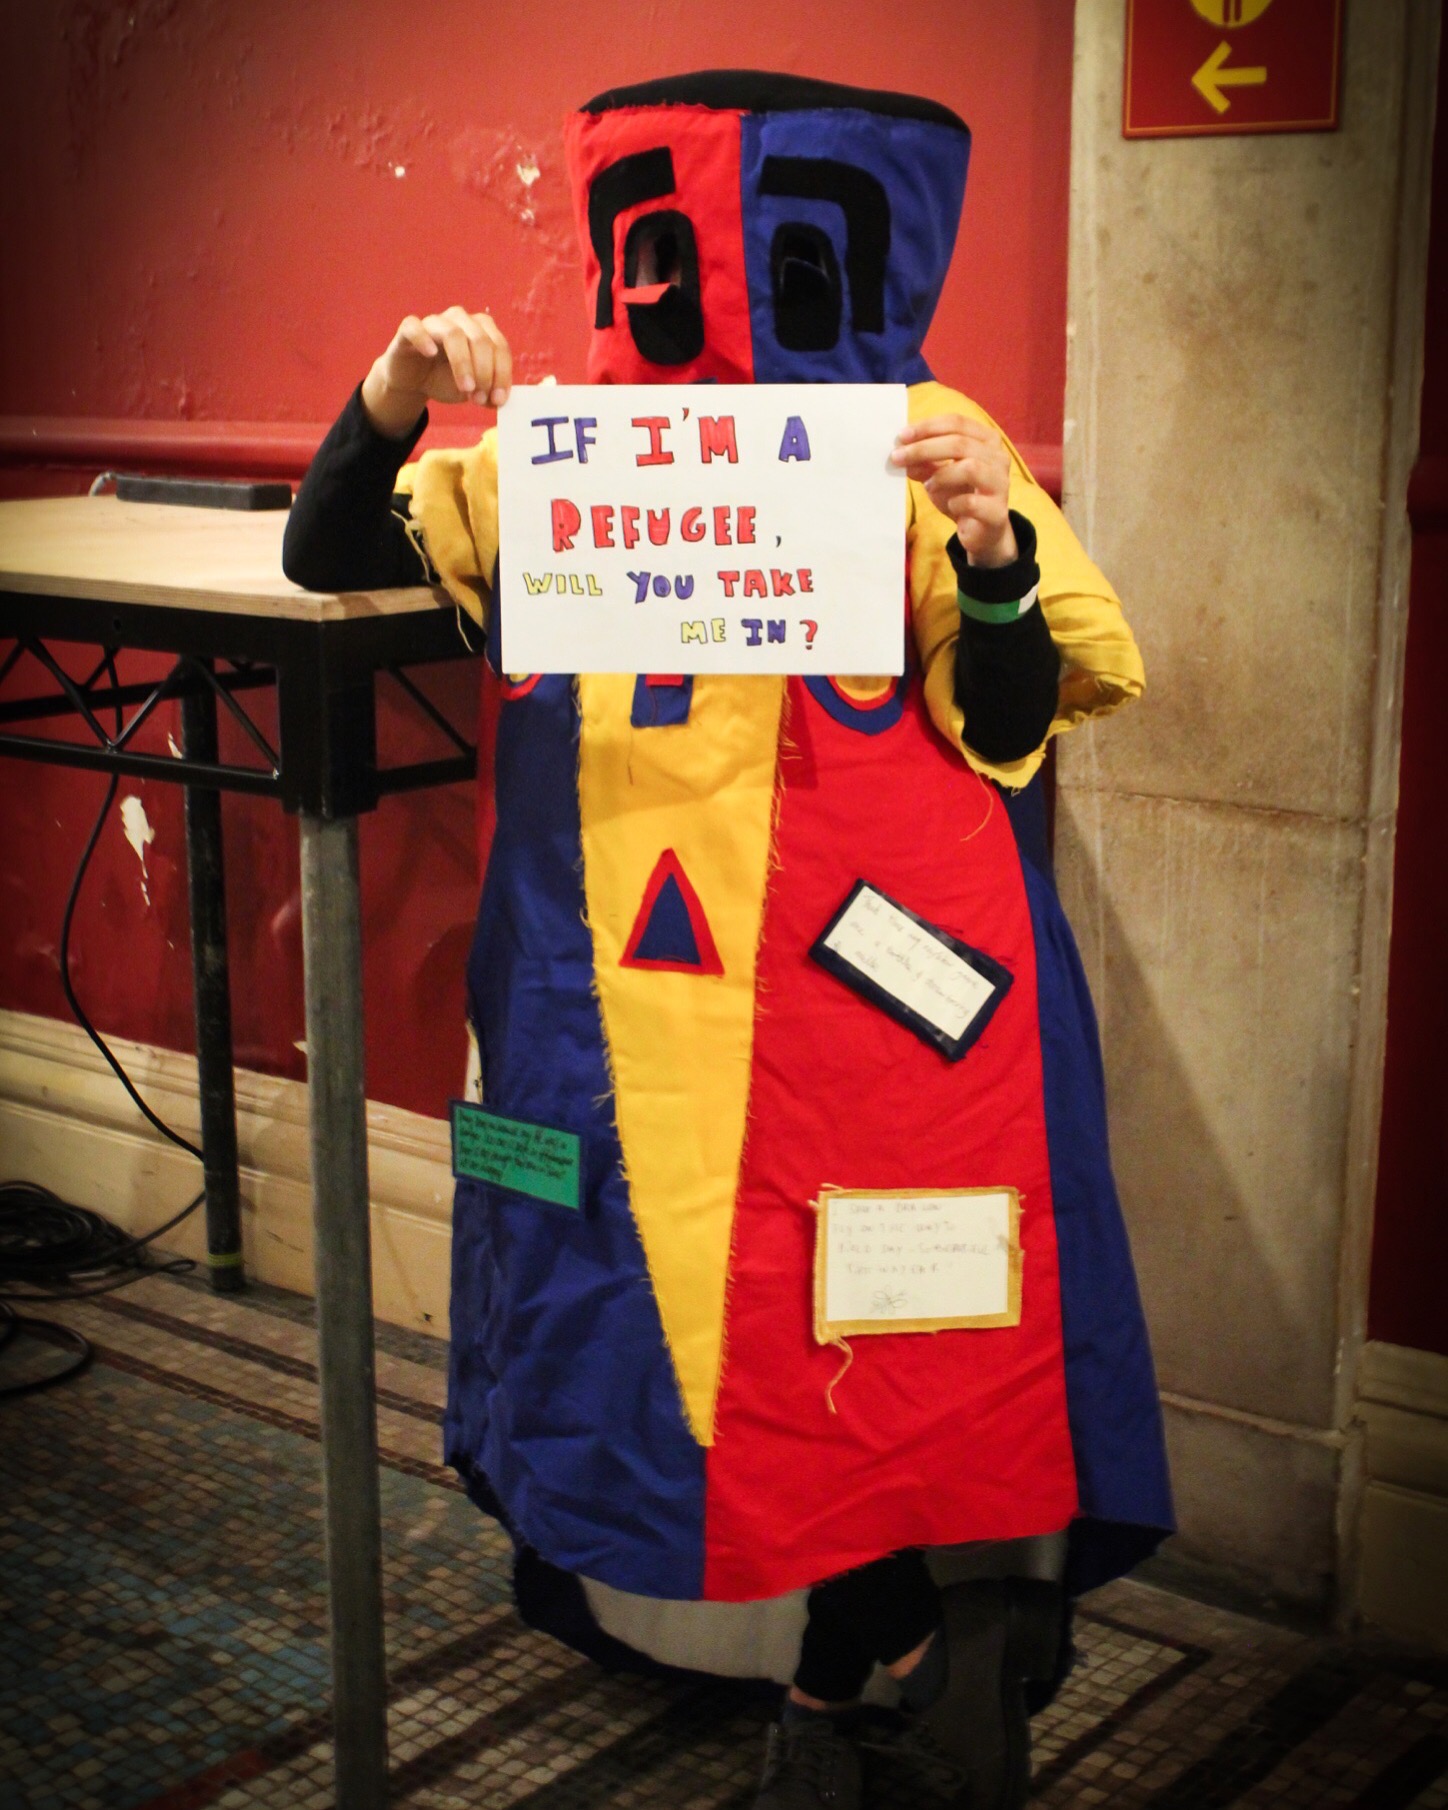 Fie wearing a red and yellow costume that obscures her face, holding up a sign which says "if I'm a refugee, will you take me in?"